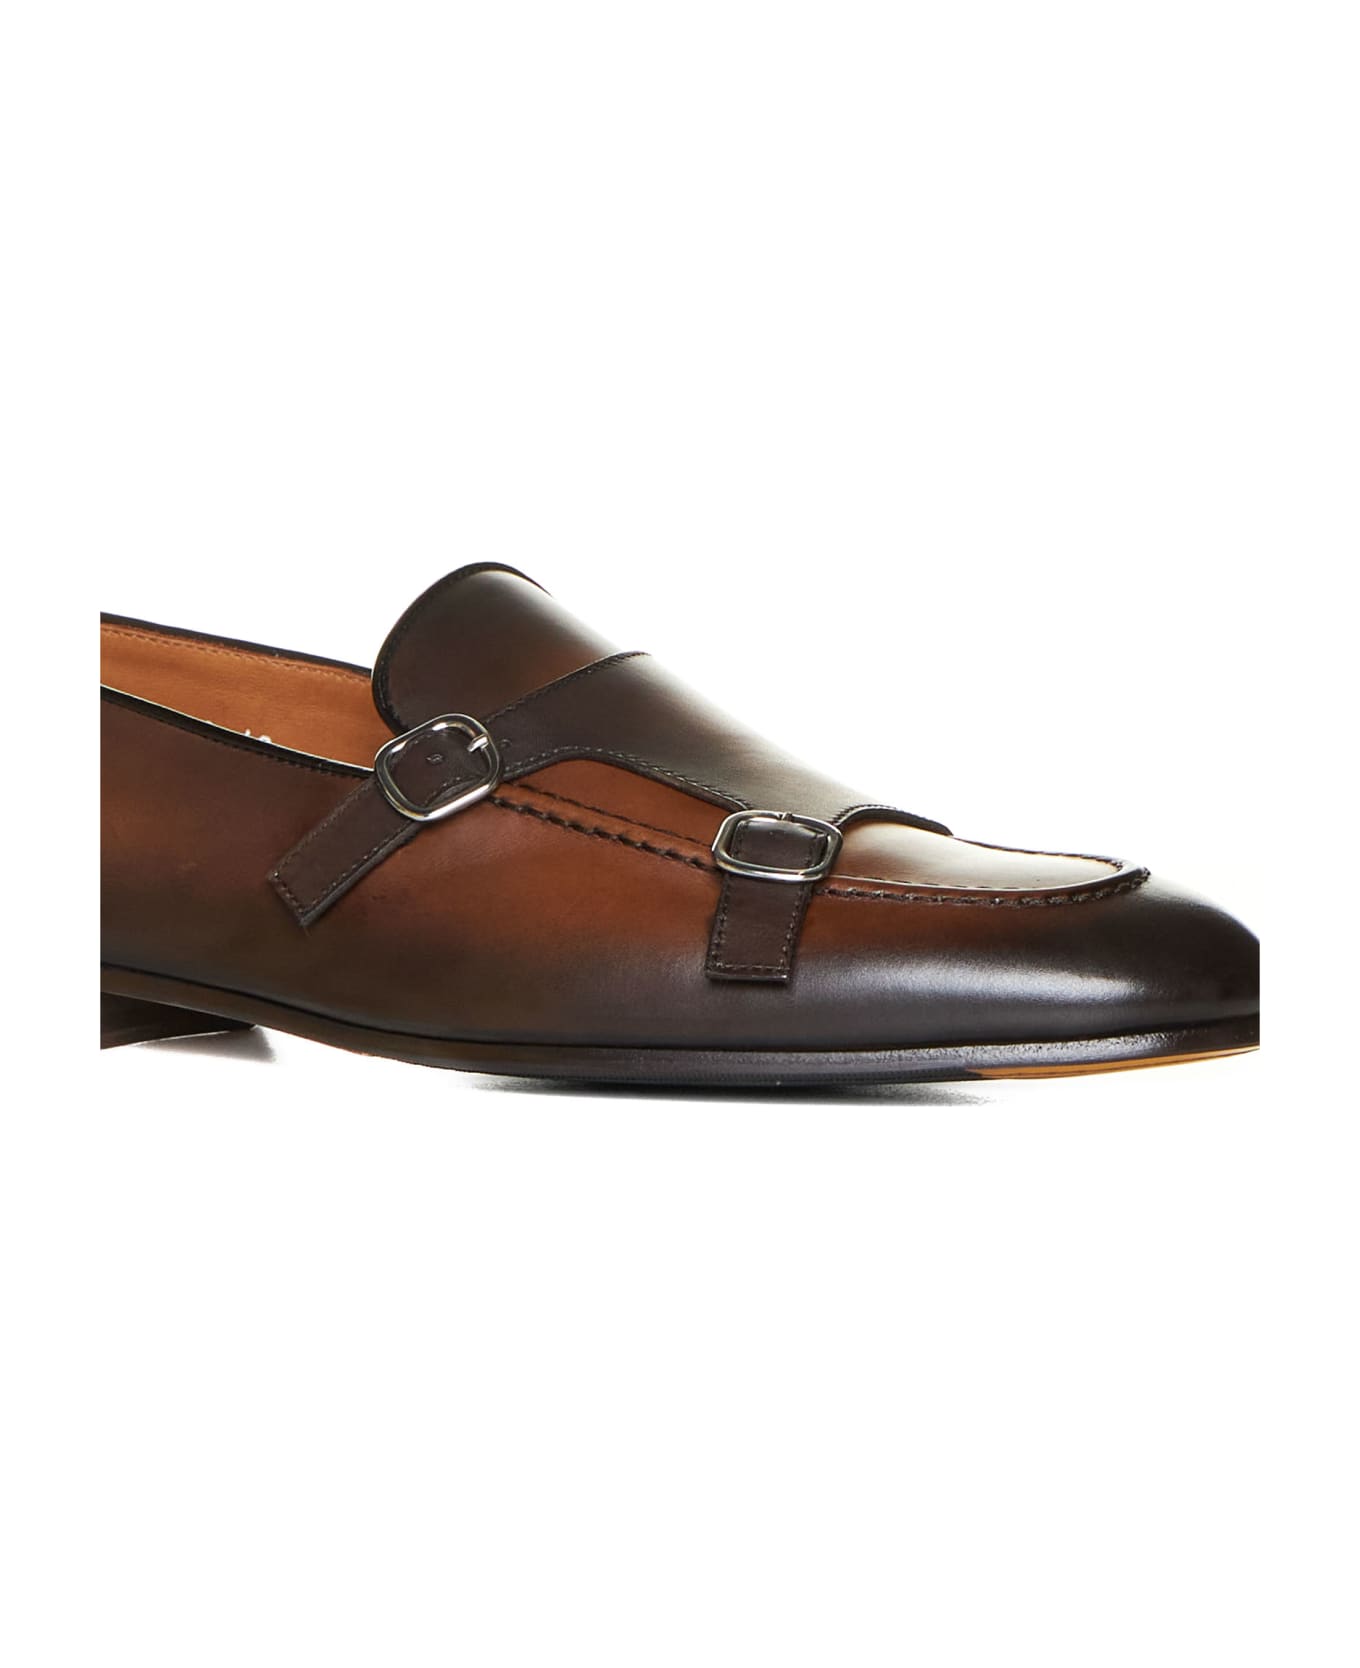 Doucal's Loafers - Wood + f.do t.moro